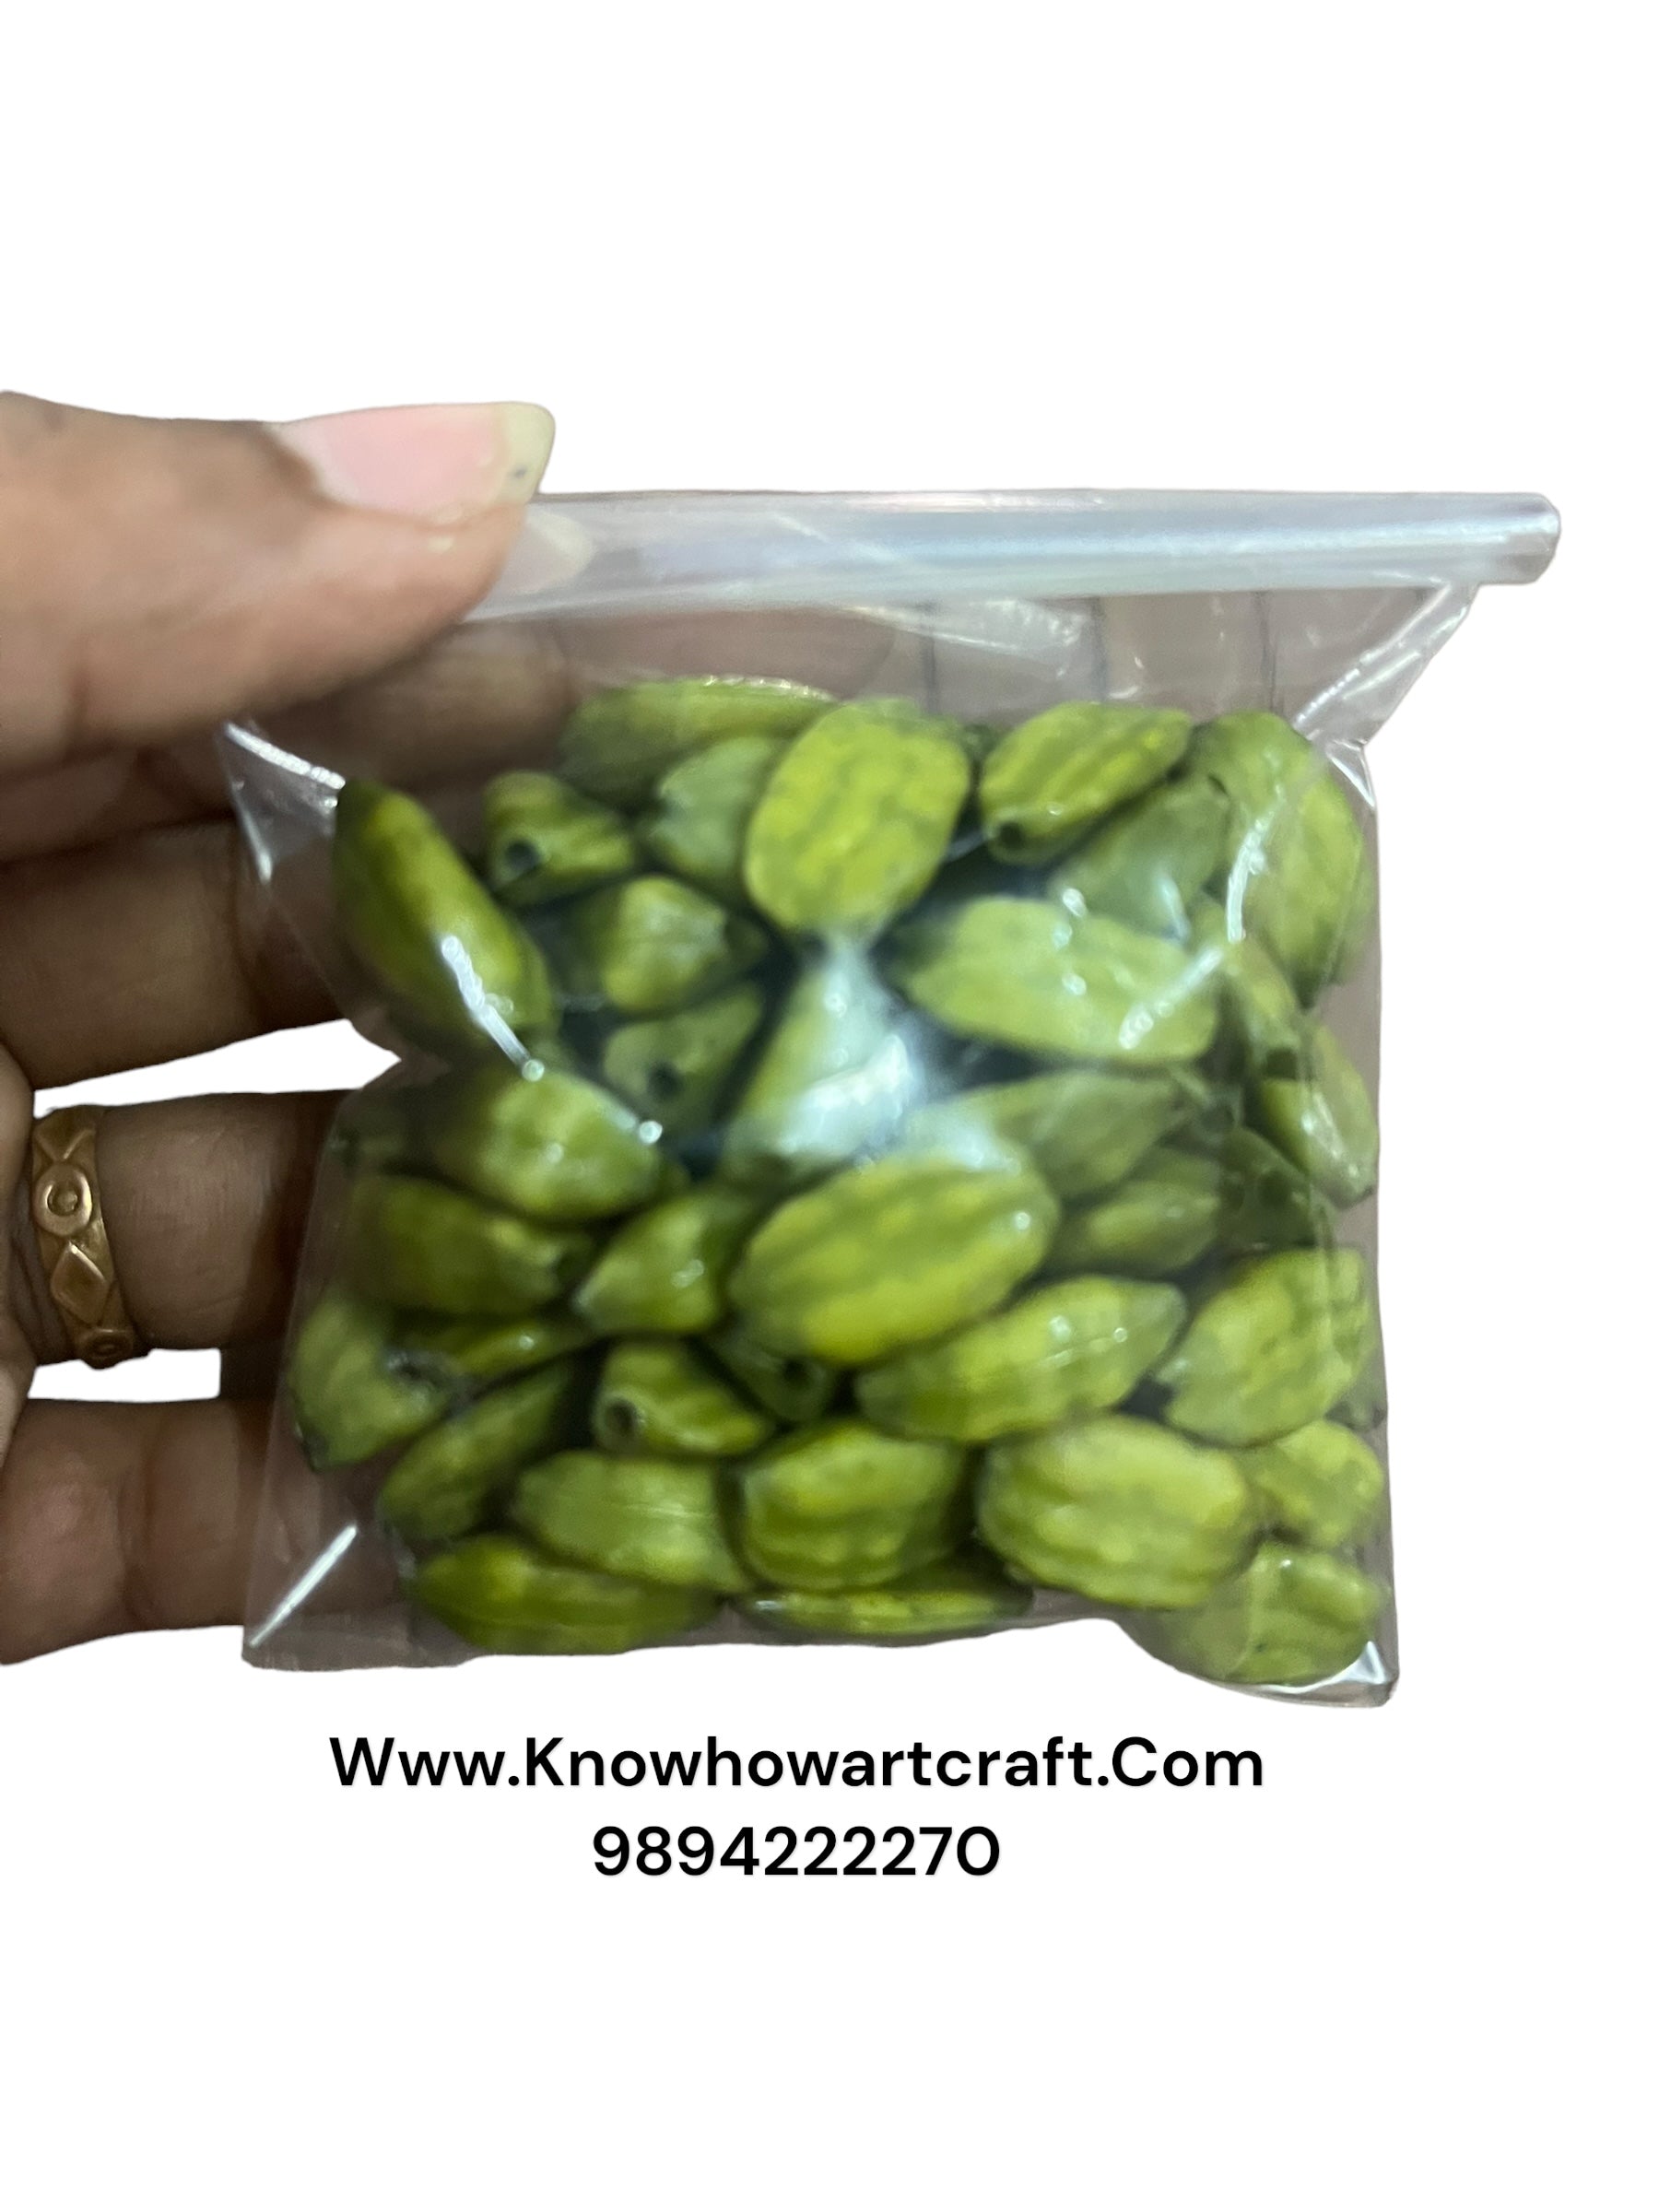 Pista beads 50g in a pack